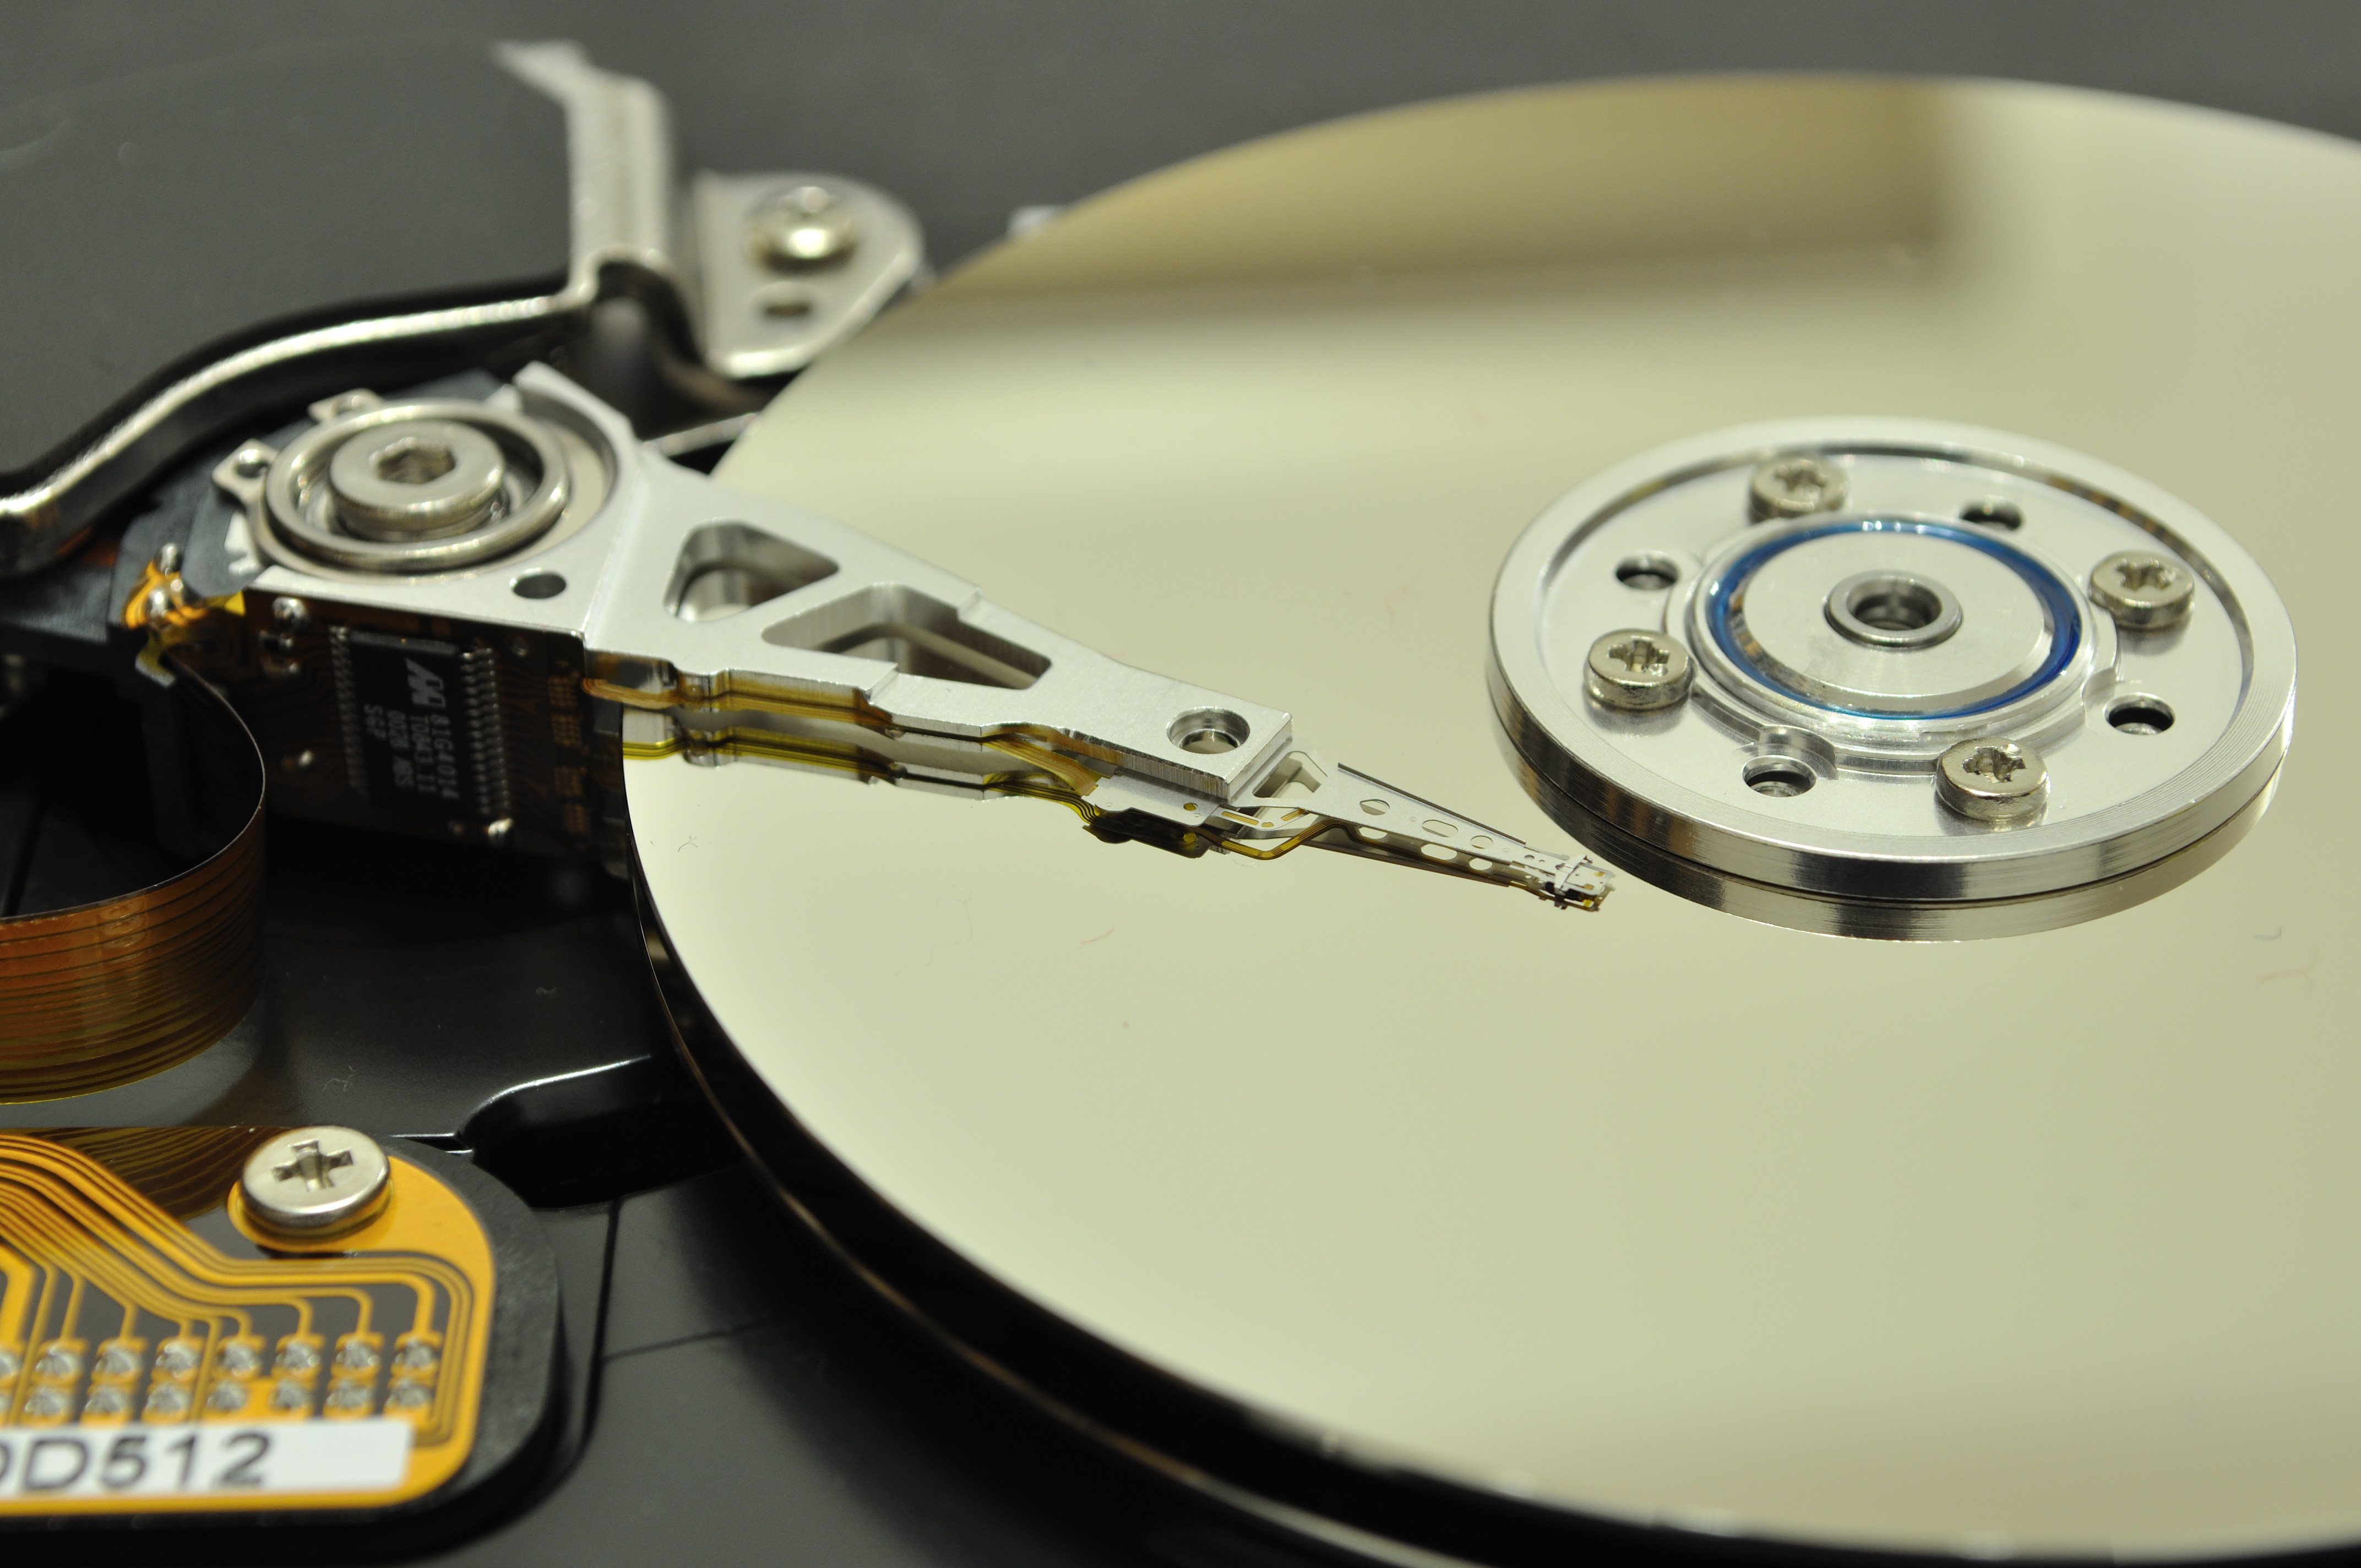 Put Your Hard Drive in the Freezer to Recover Data - TheTechMentor.com